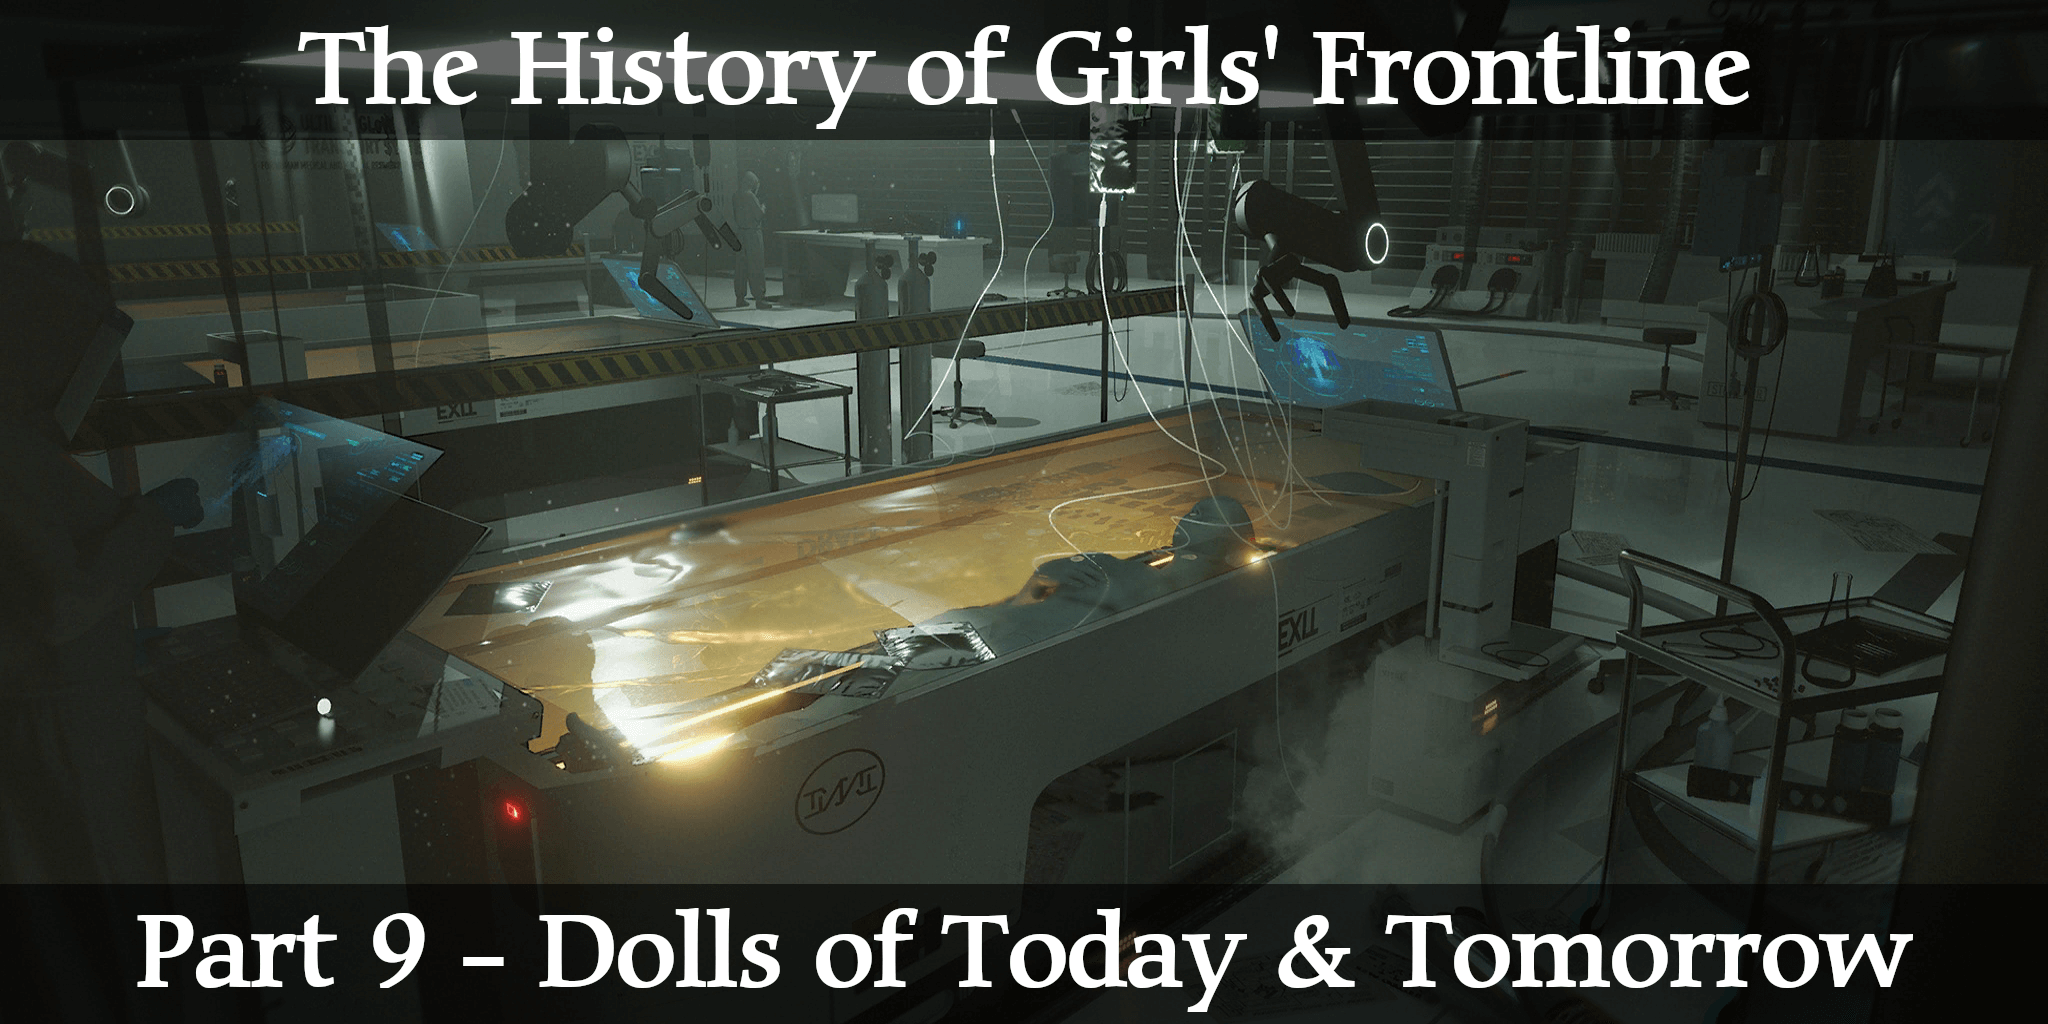 Part 9 of the complete history of Girls' Frontline. Part 9 covers the creation, development, and application of modern Dolls, as well as various projects for the next generation.